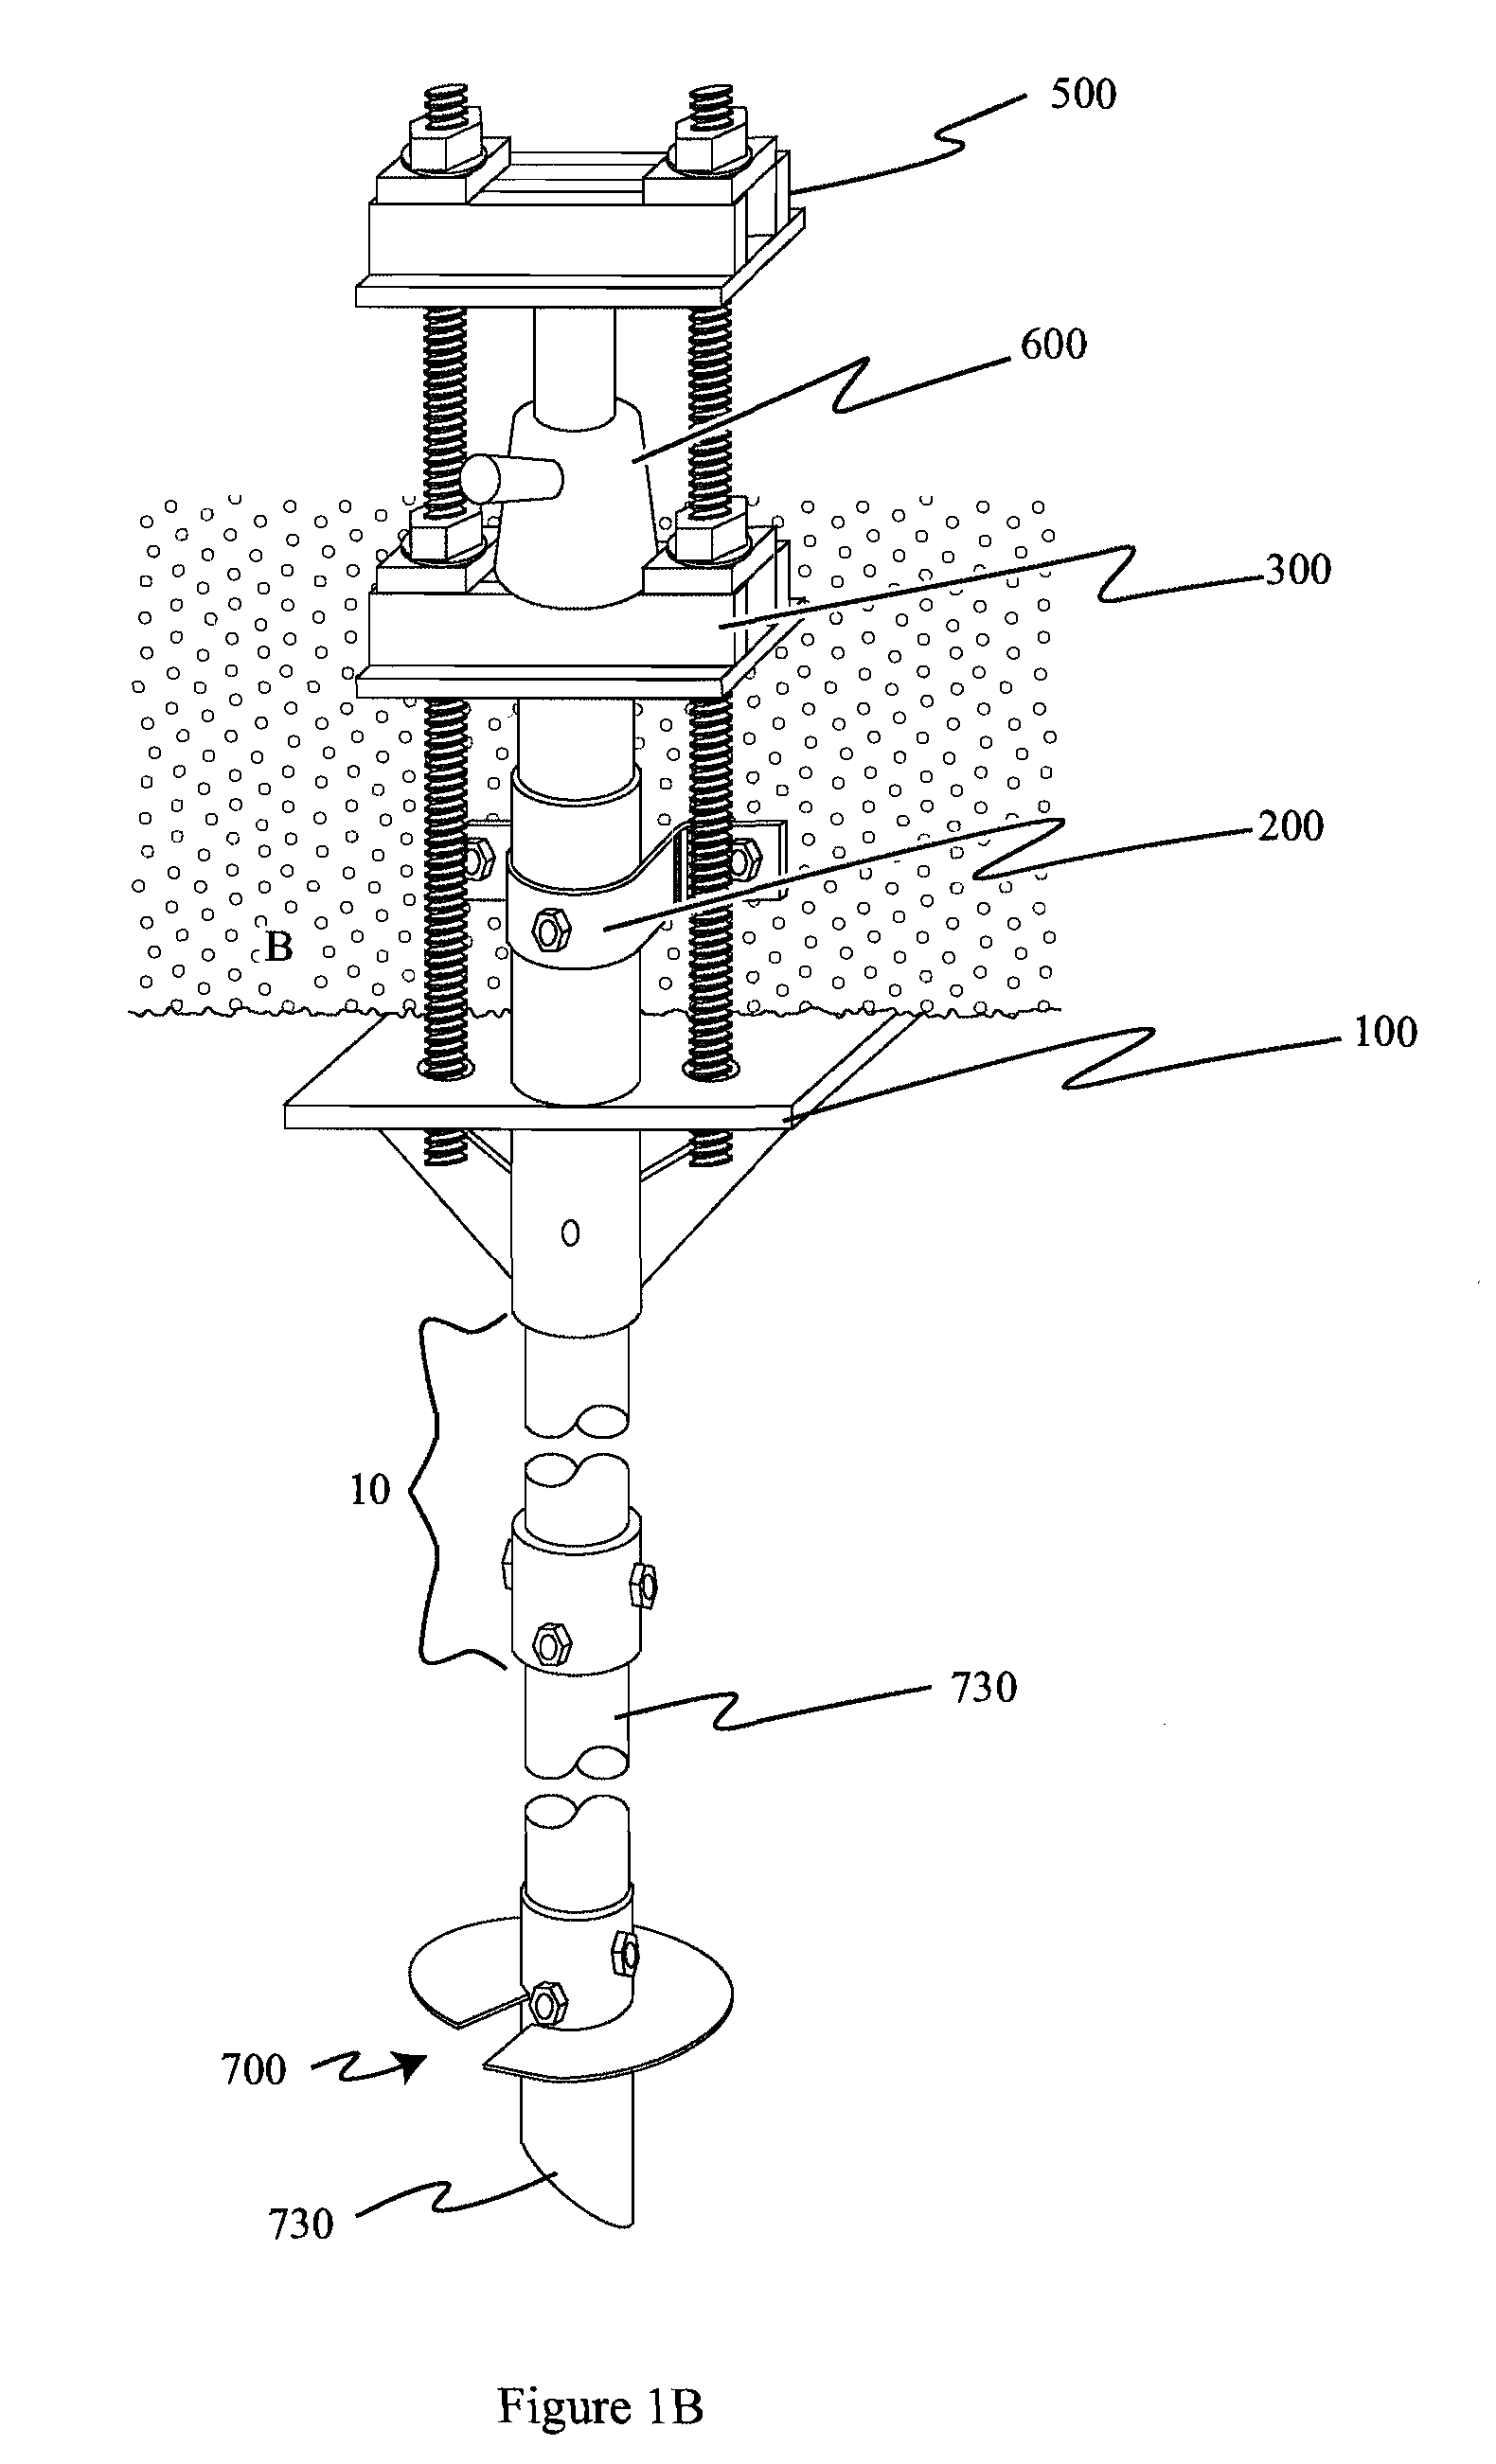 Apparatus for lifting building foundations